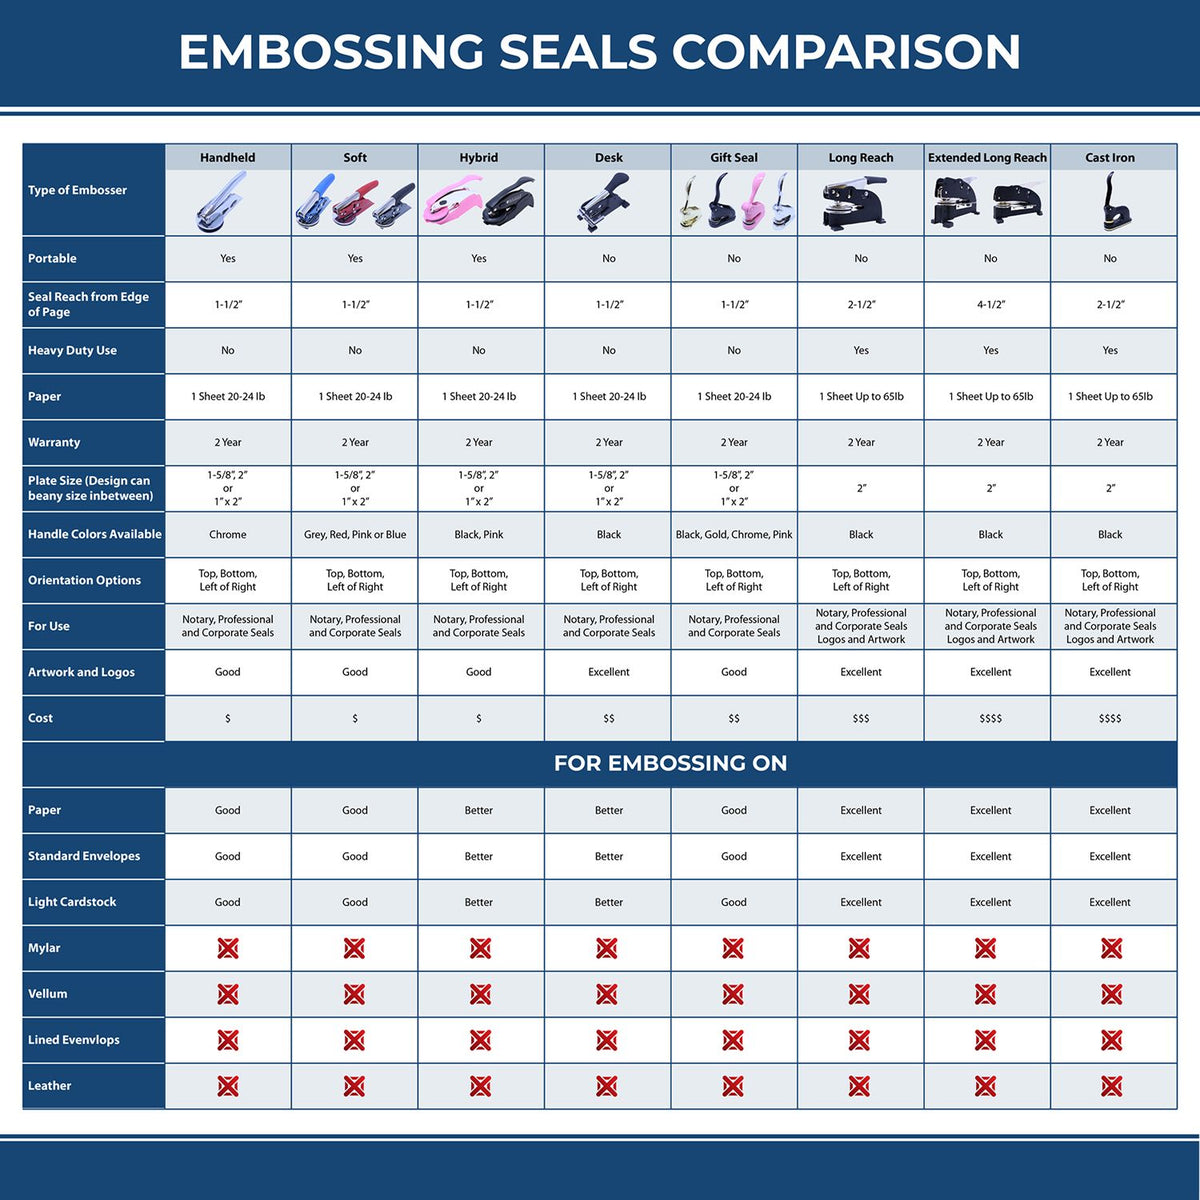 A comparison chart for the different types of mount models available for the State of North Carolina Extended Long Reach Geologist Seal